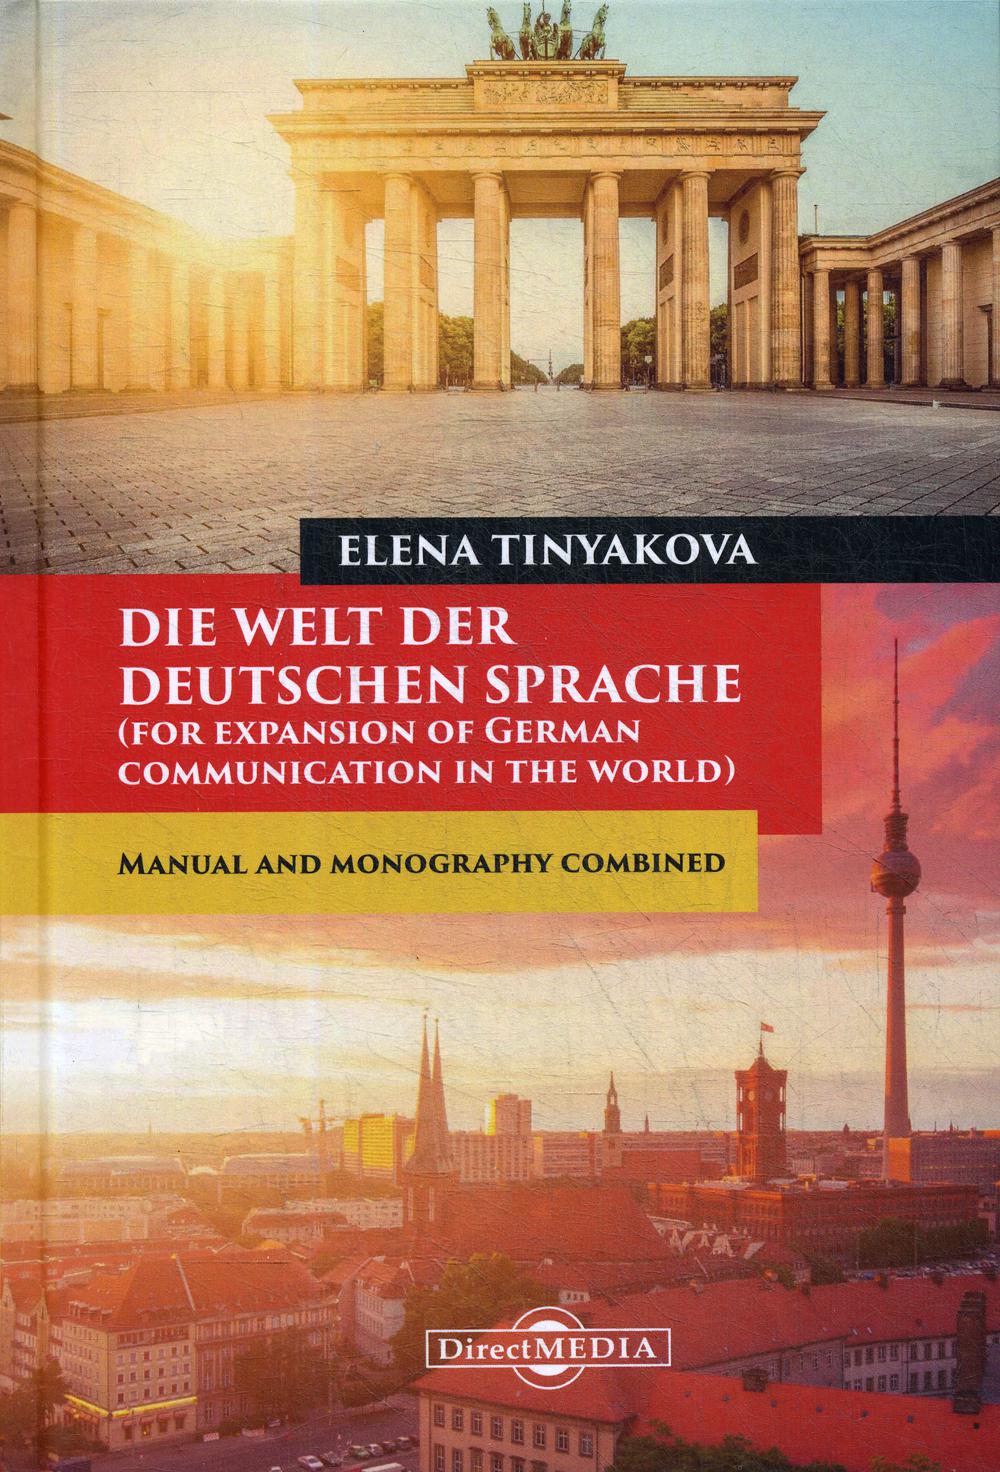 Die Welt der Deutschen Sprache (for expansion of German communication in the world): manual and monography combined. 4-th edit., change and adapted